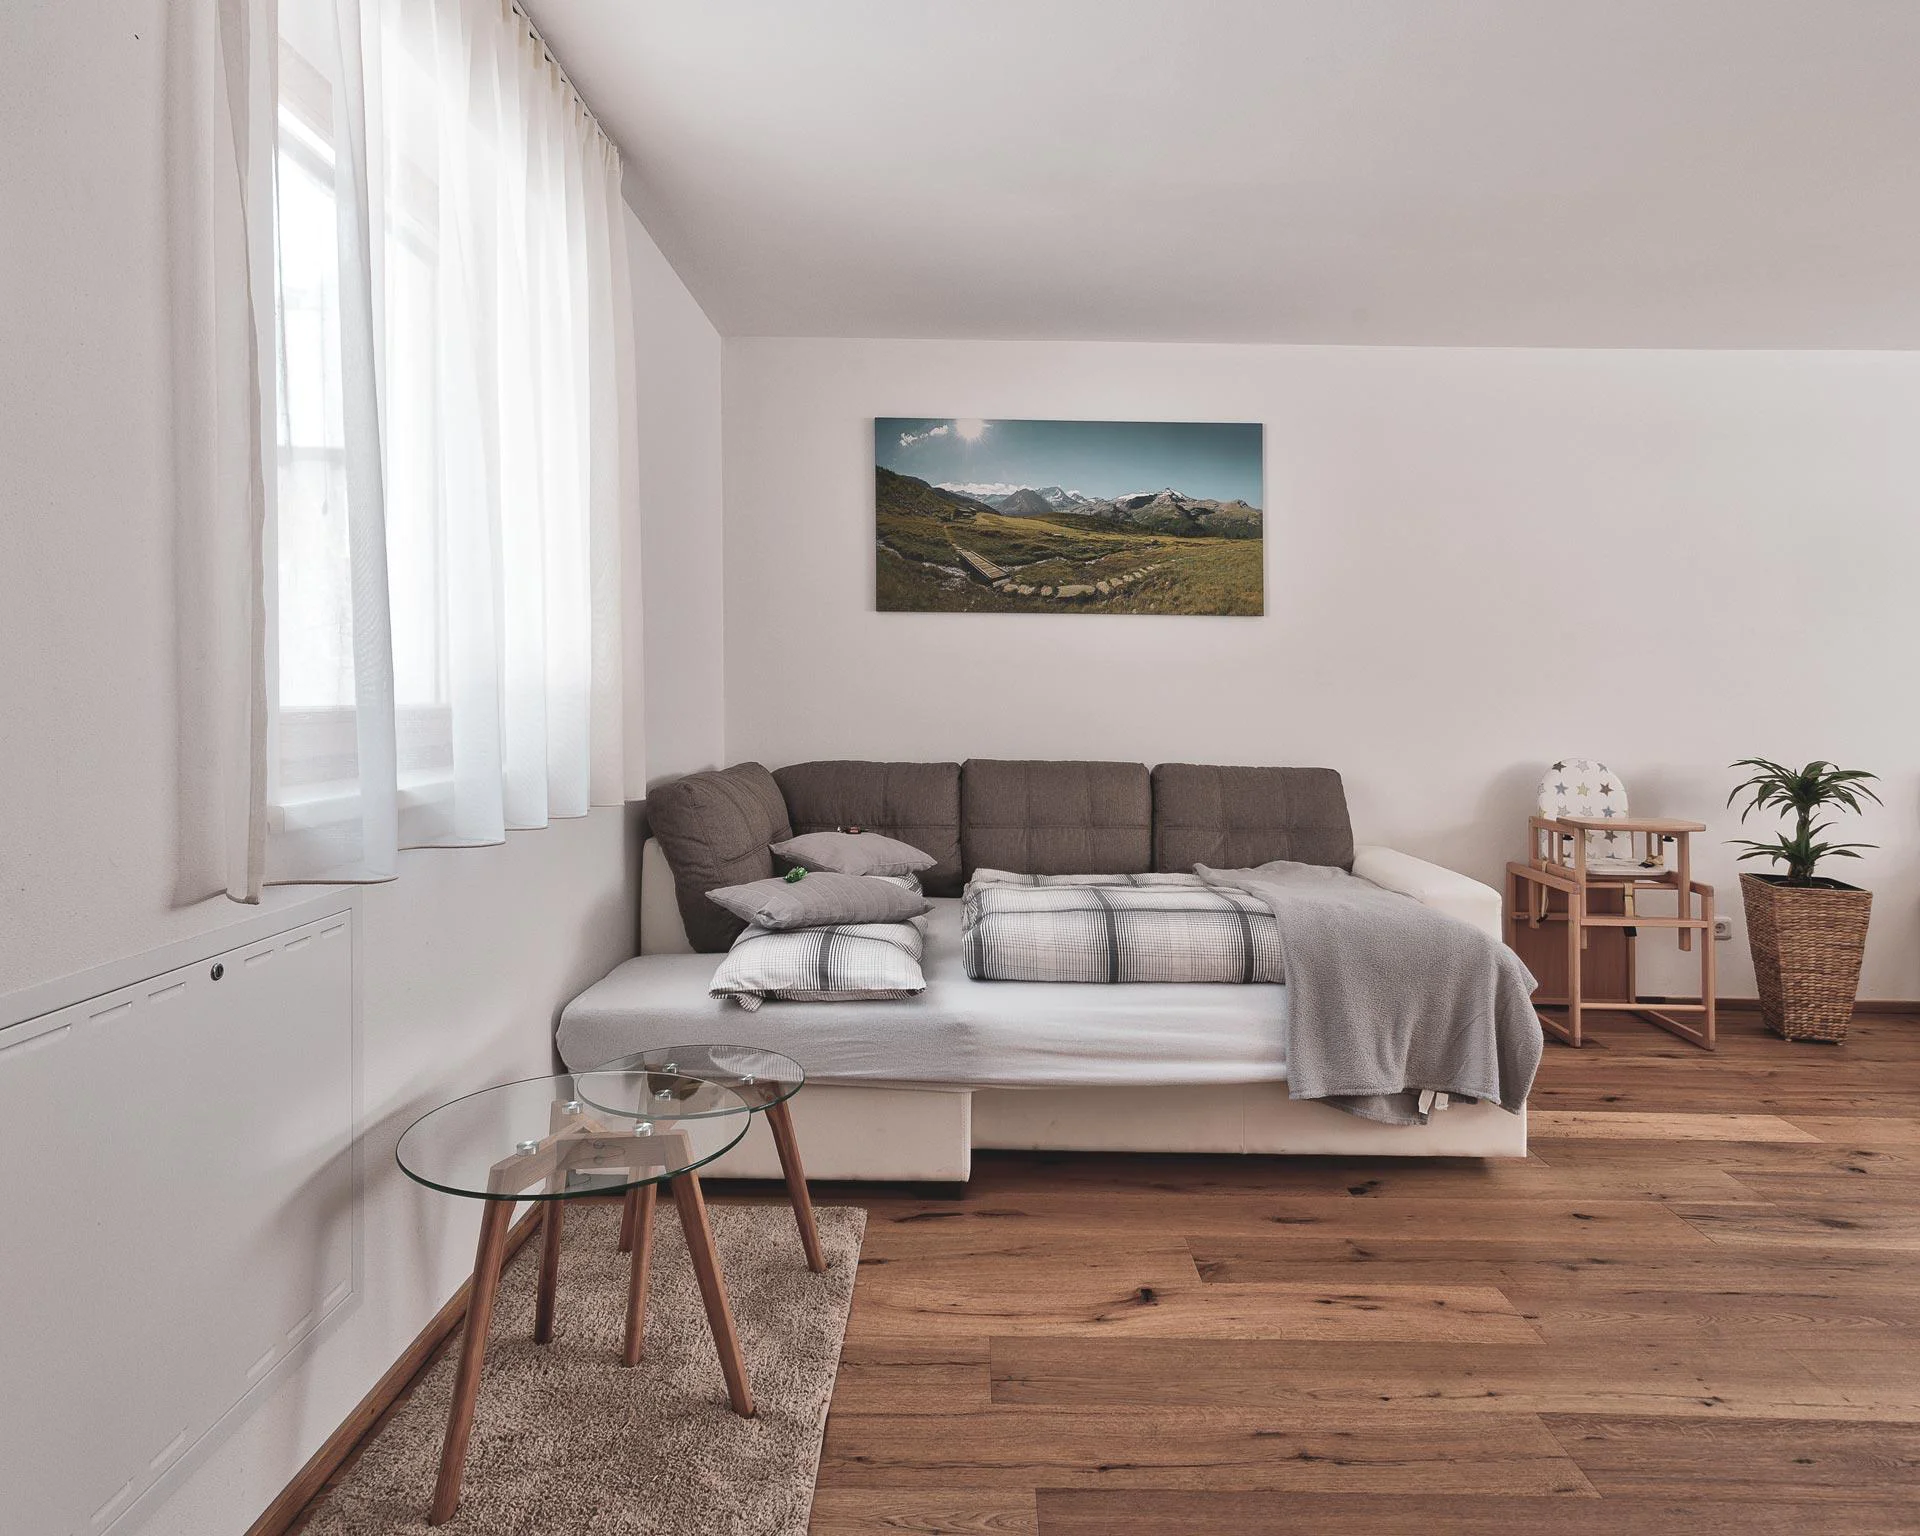 Apartments Pfarrwirt Sand in Taufers/Campo Tures 7 suedtirol.info